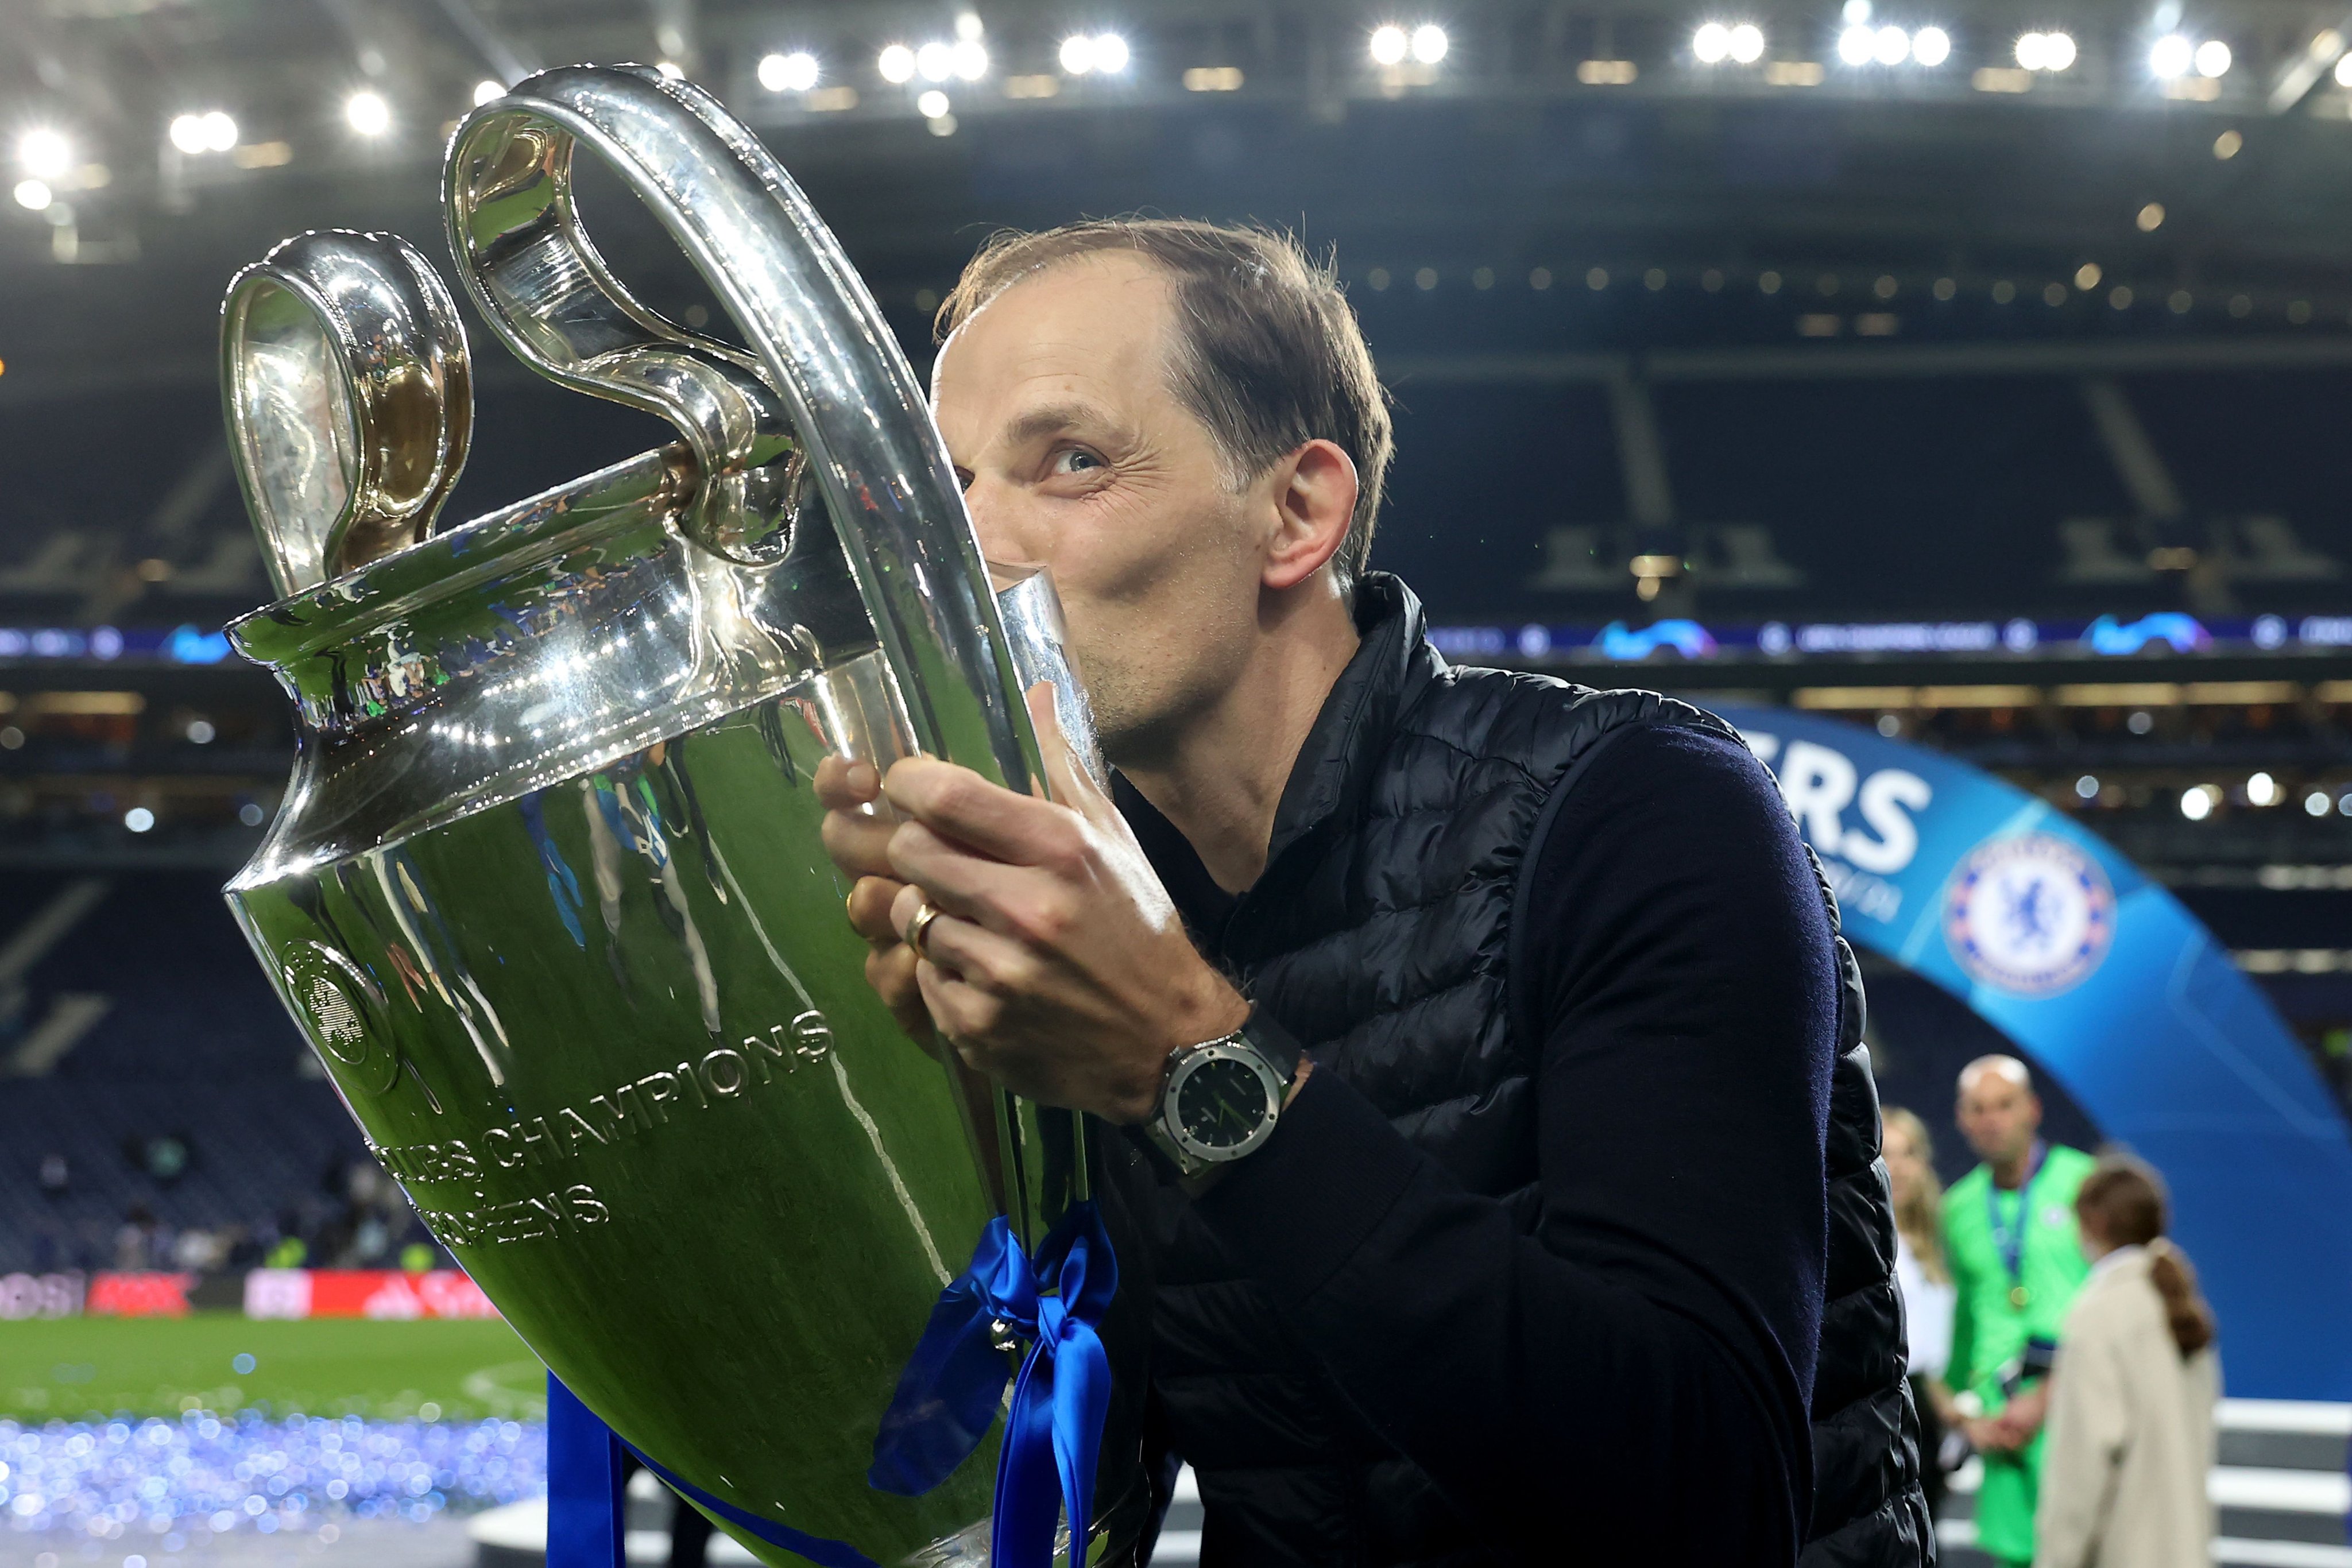 Chelsea confirm that they have parted ways with manager Thomas Tuchel